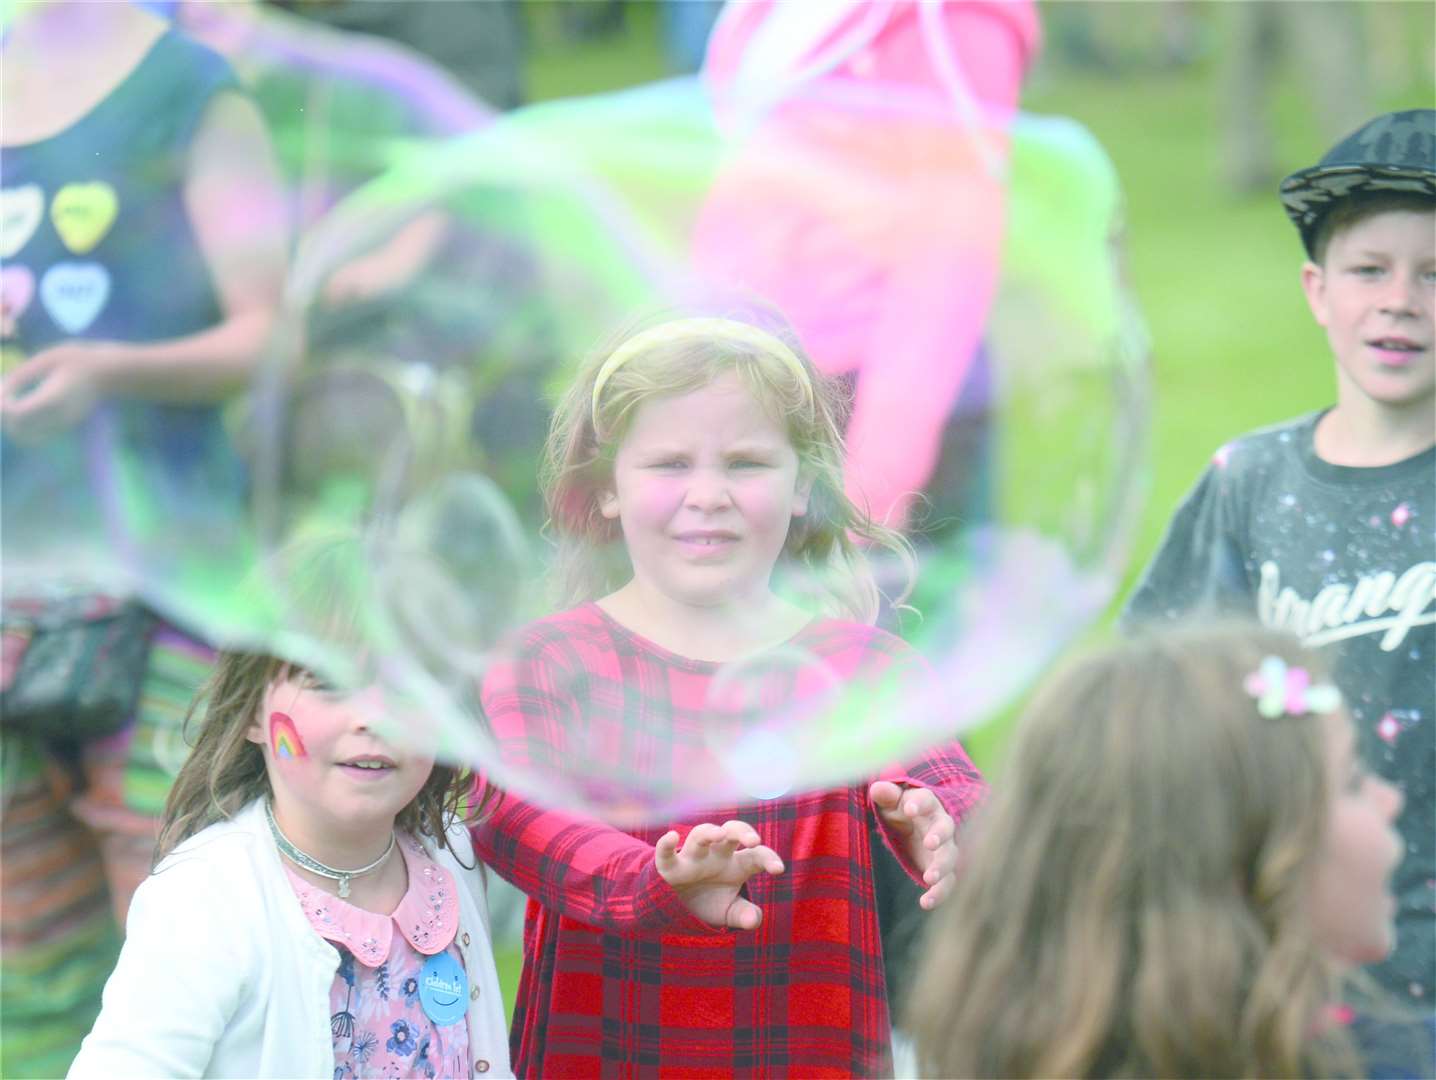 Inverness Highland Games 2018 at Bught Park. Lola Bell Wilkie fascinated by giant bubbles. Picture: Gary Anthony